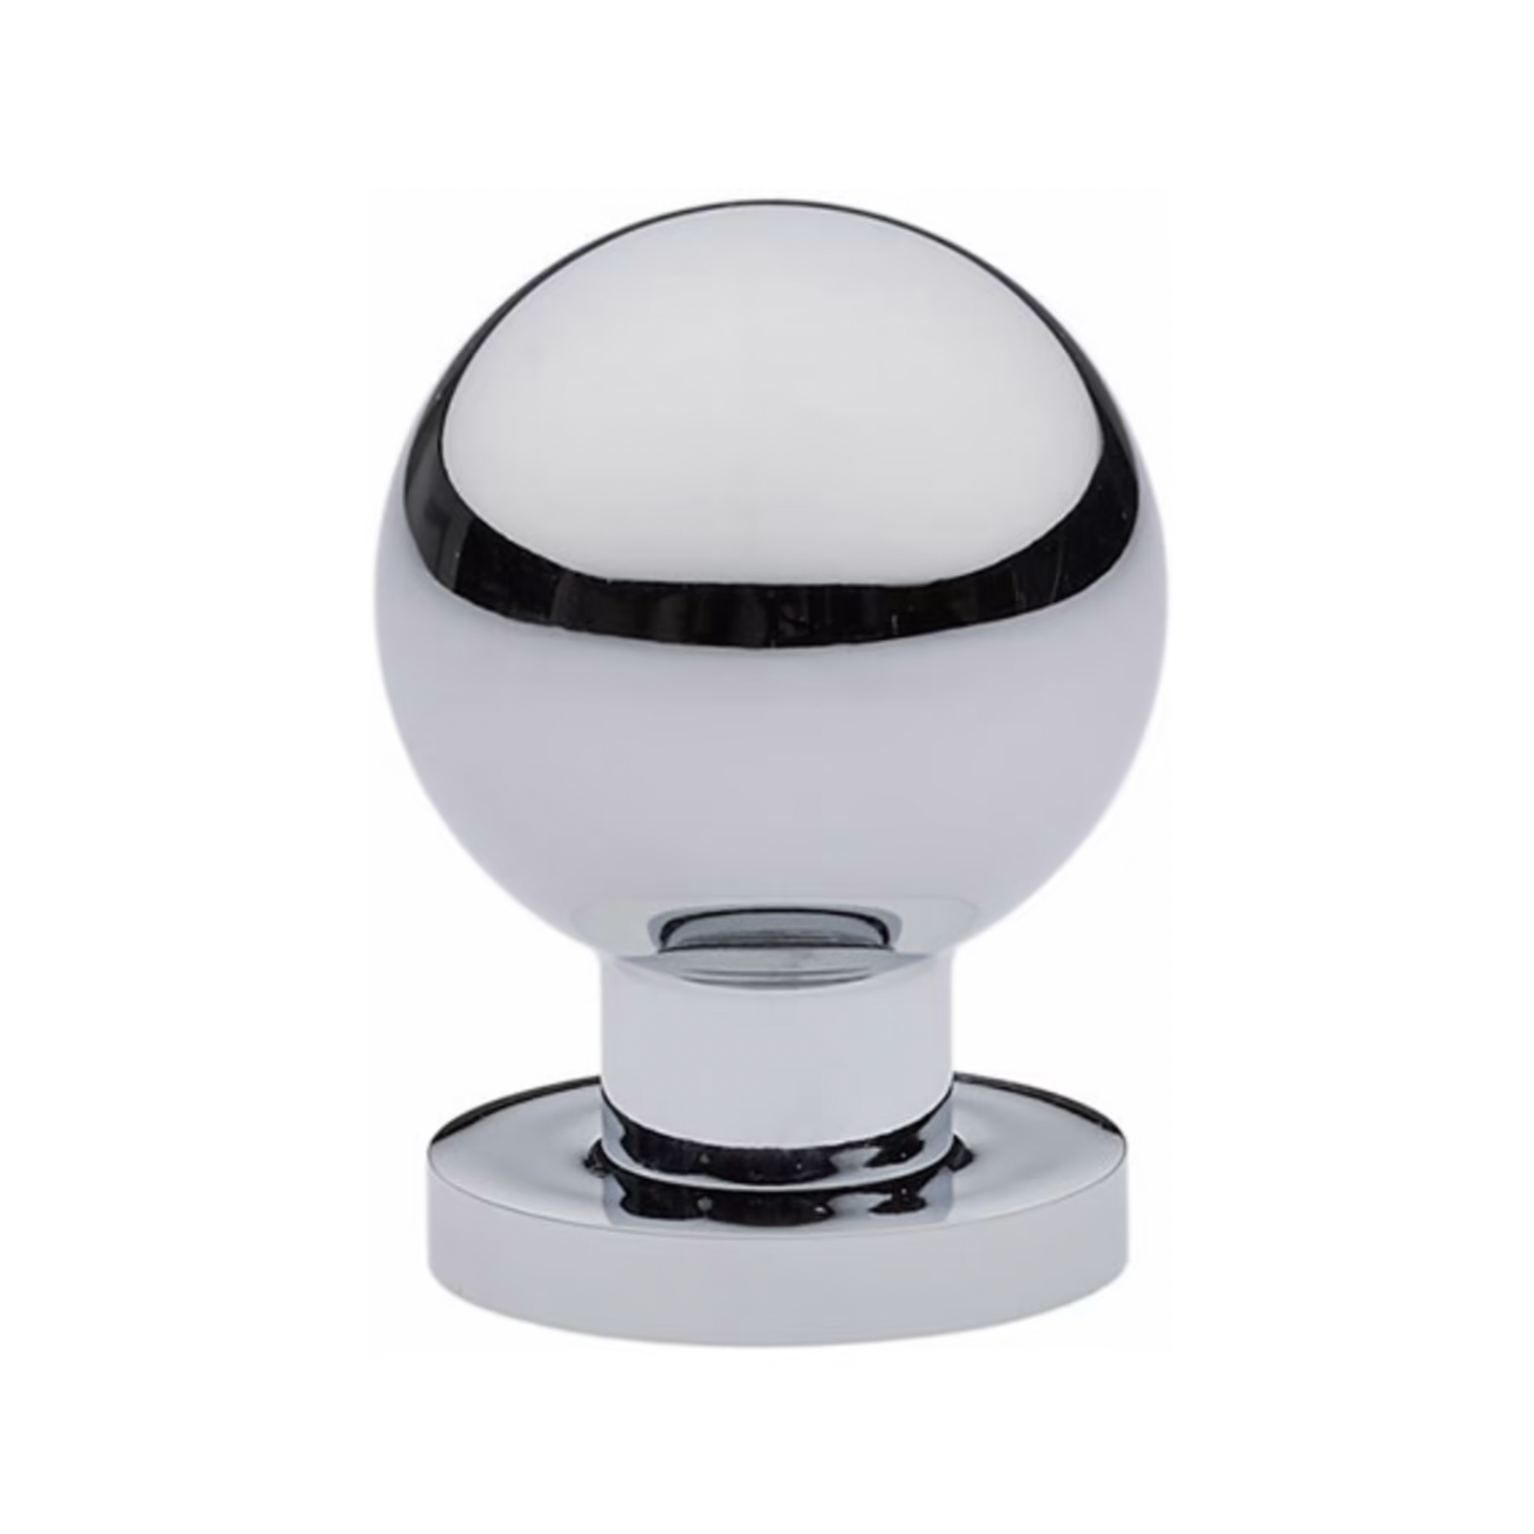 Omni Cabinet Knobs and Drawer Pulls in Polished Chrome - Industry Hardware